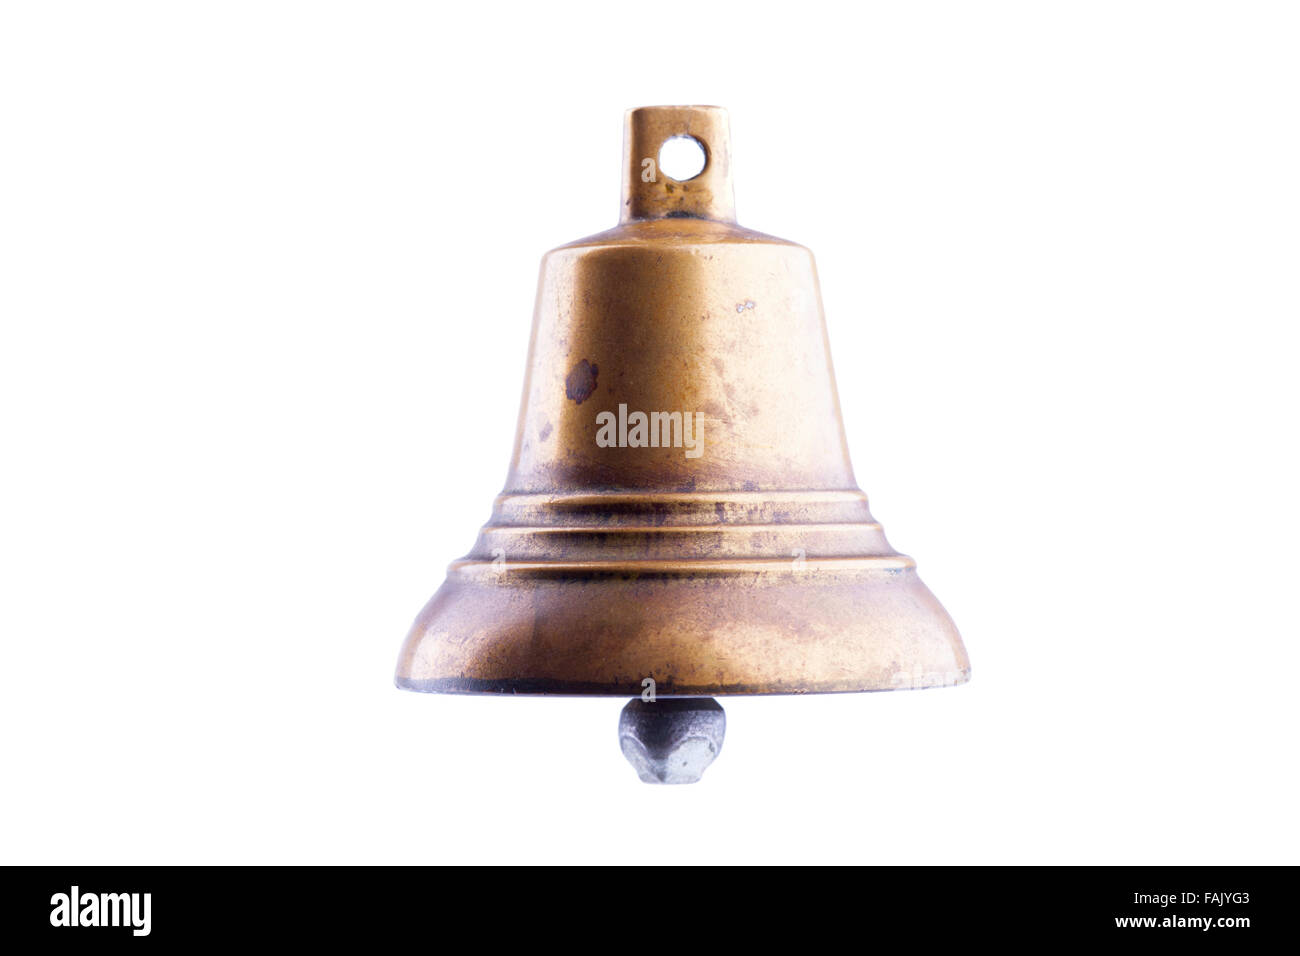 bronze bell isolated on white background Stock Photo